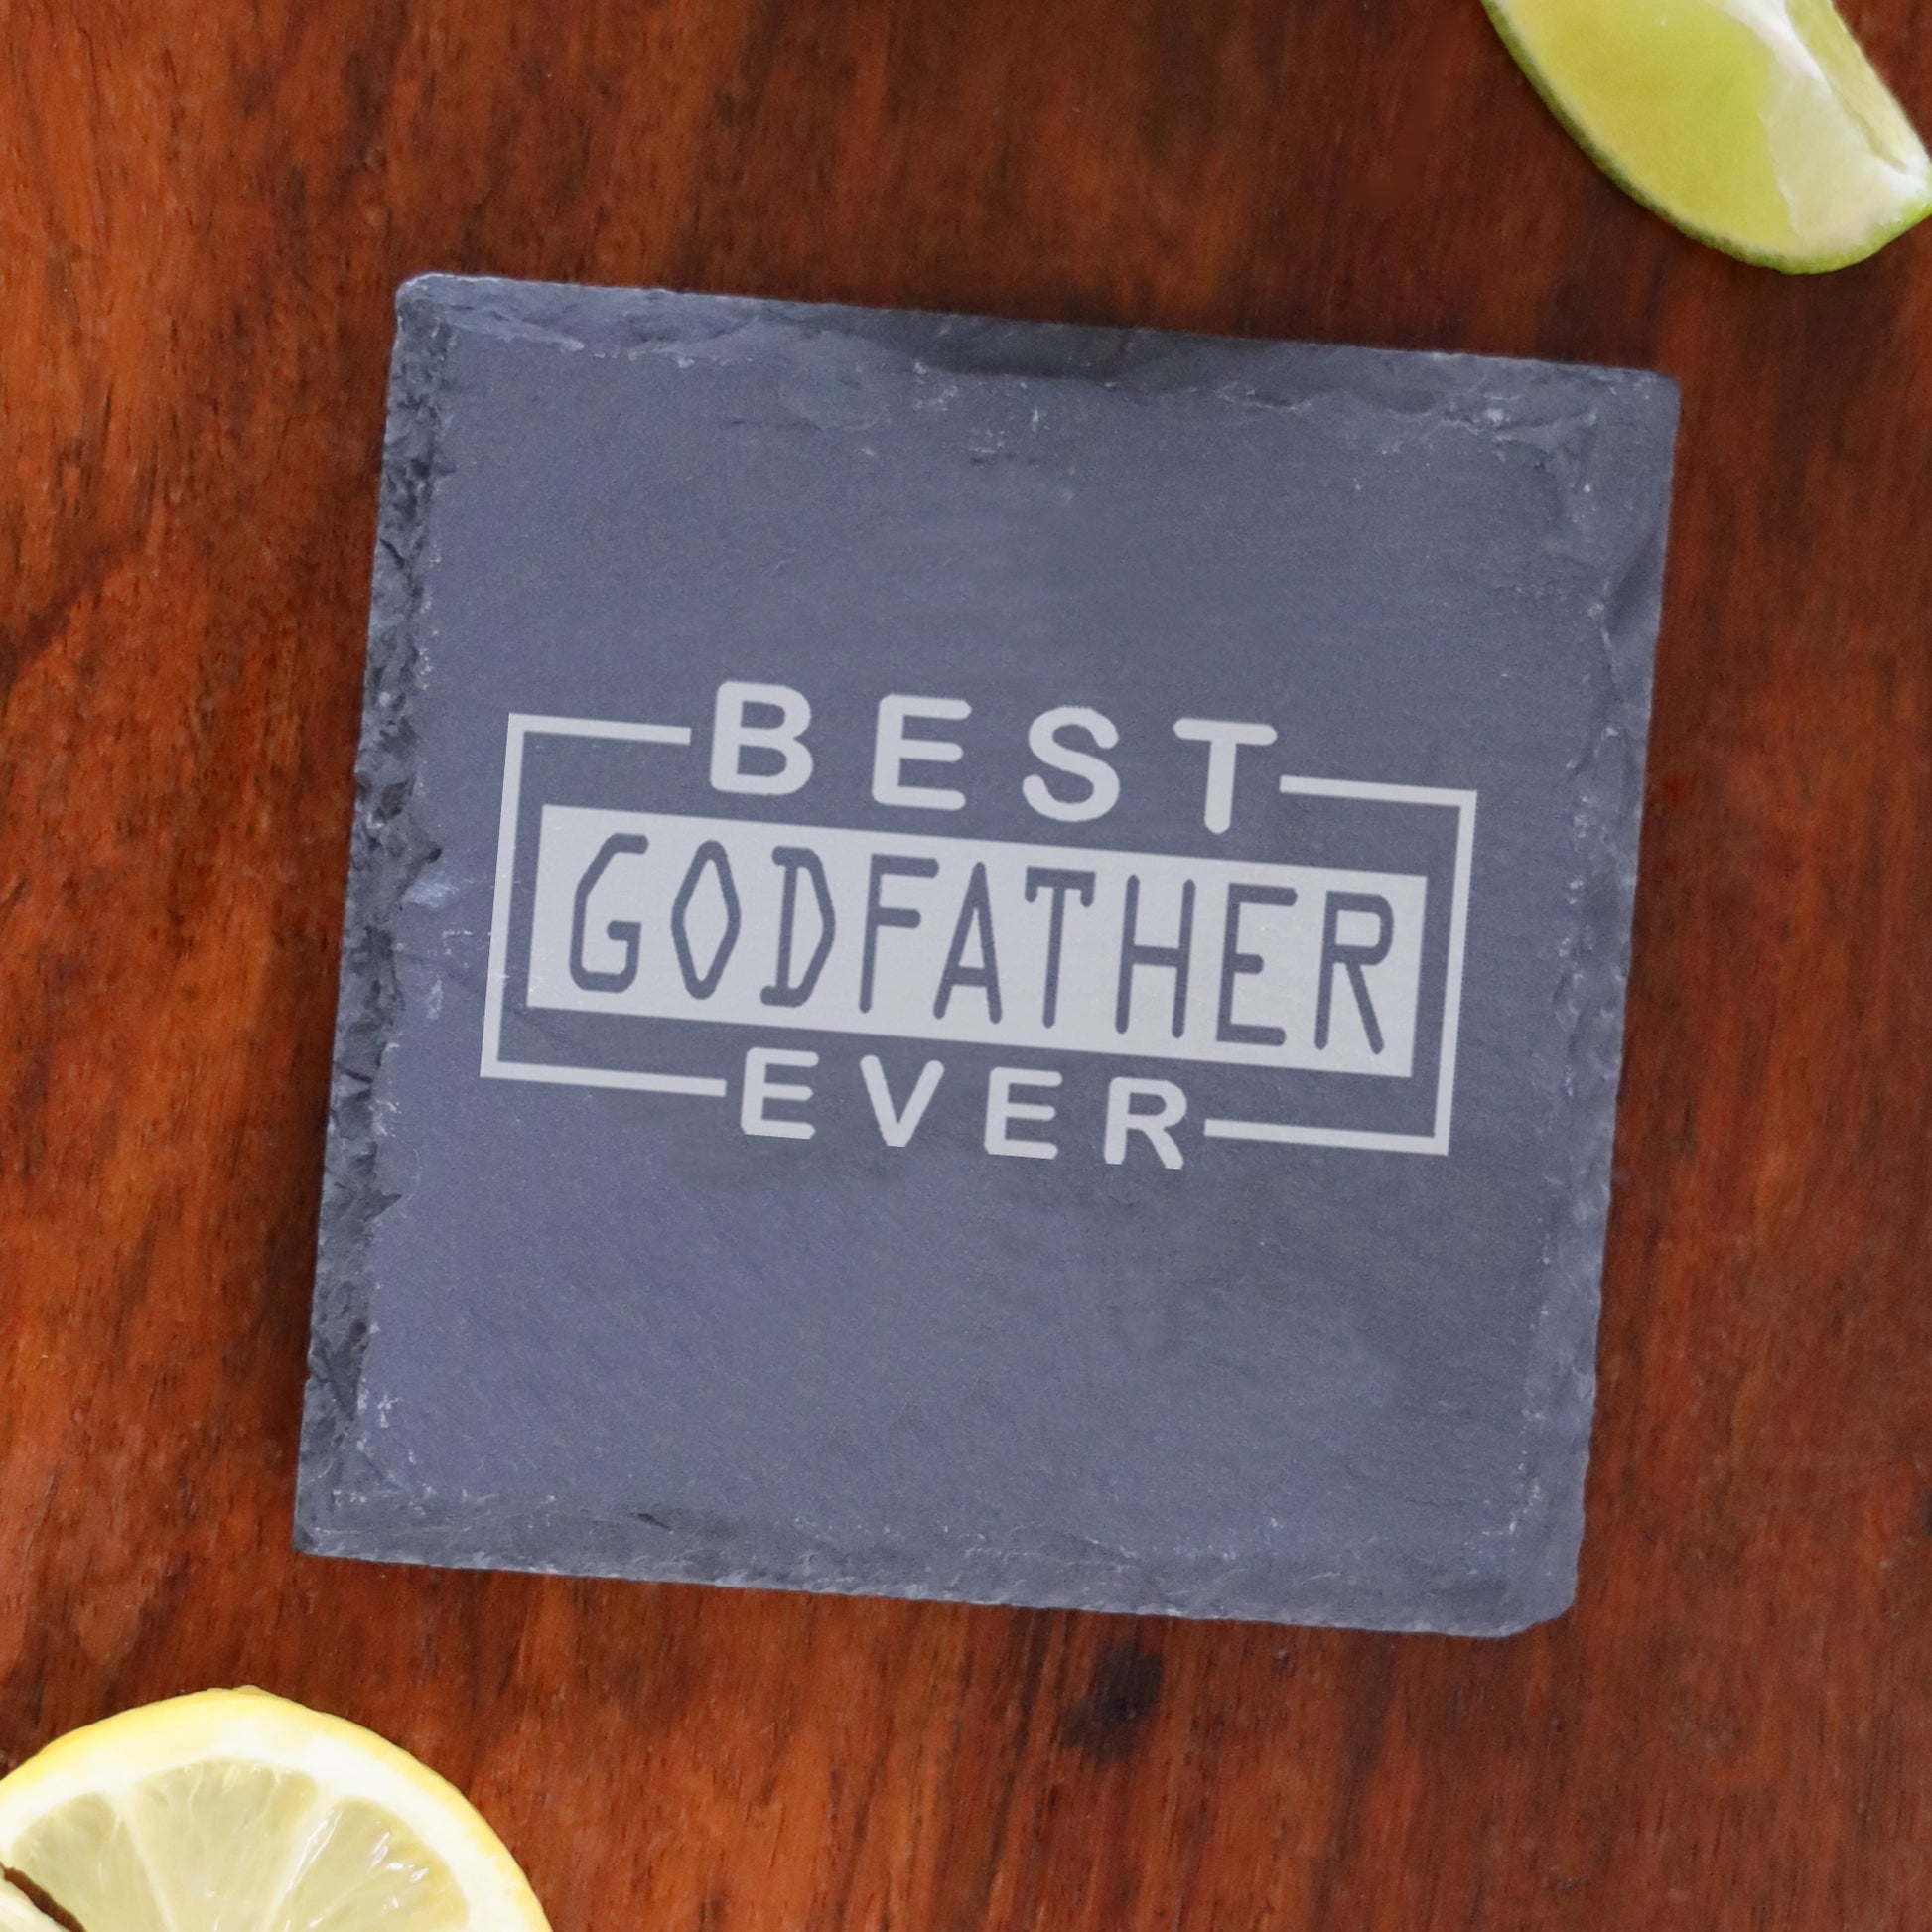 Best Godfather Ever Engraved Wine Glass | Godparent Gift for Him  - Always Looking Good -   